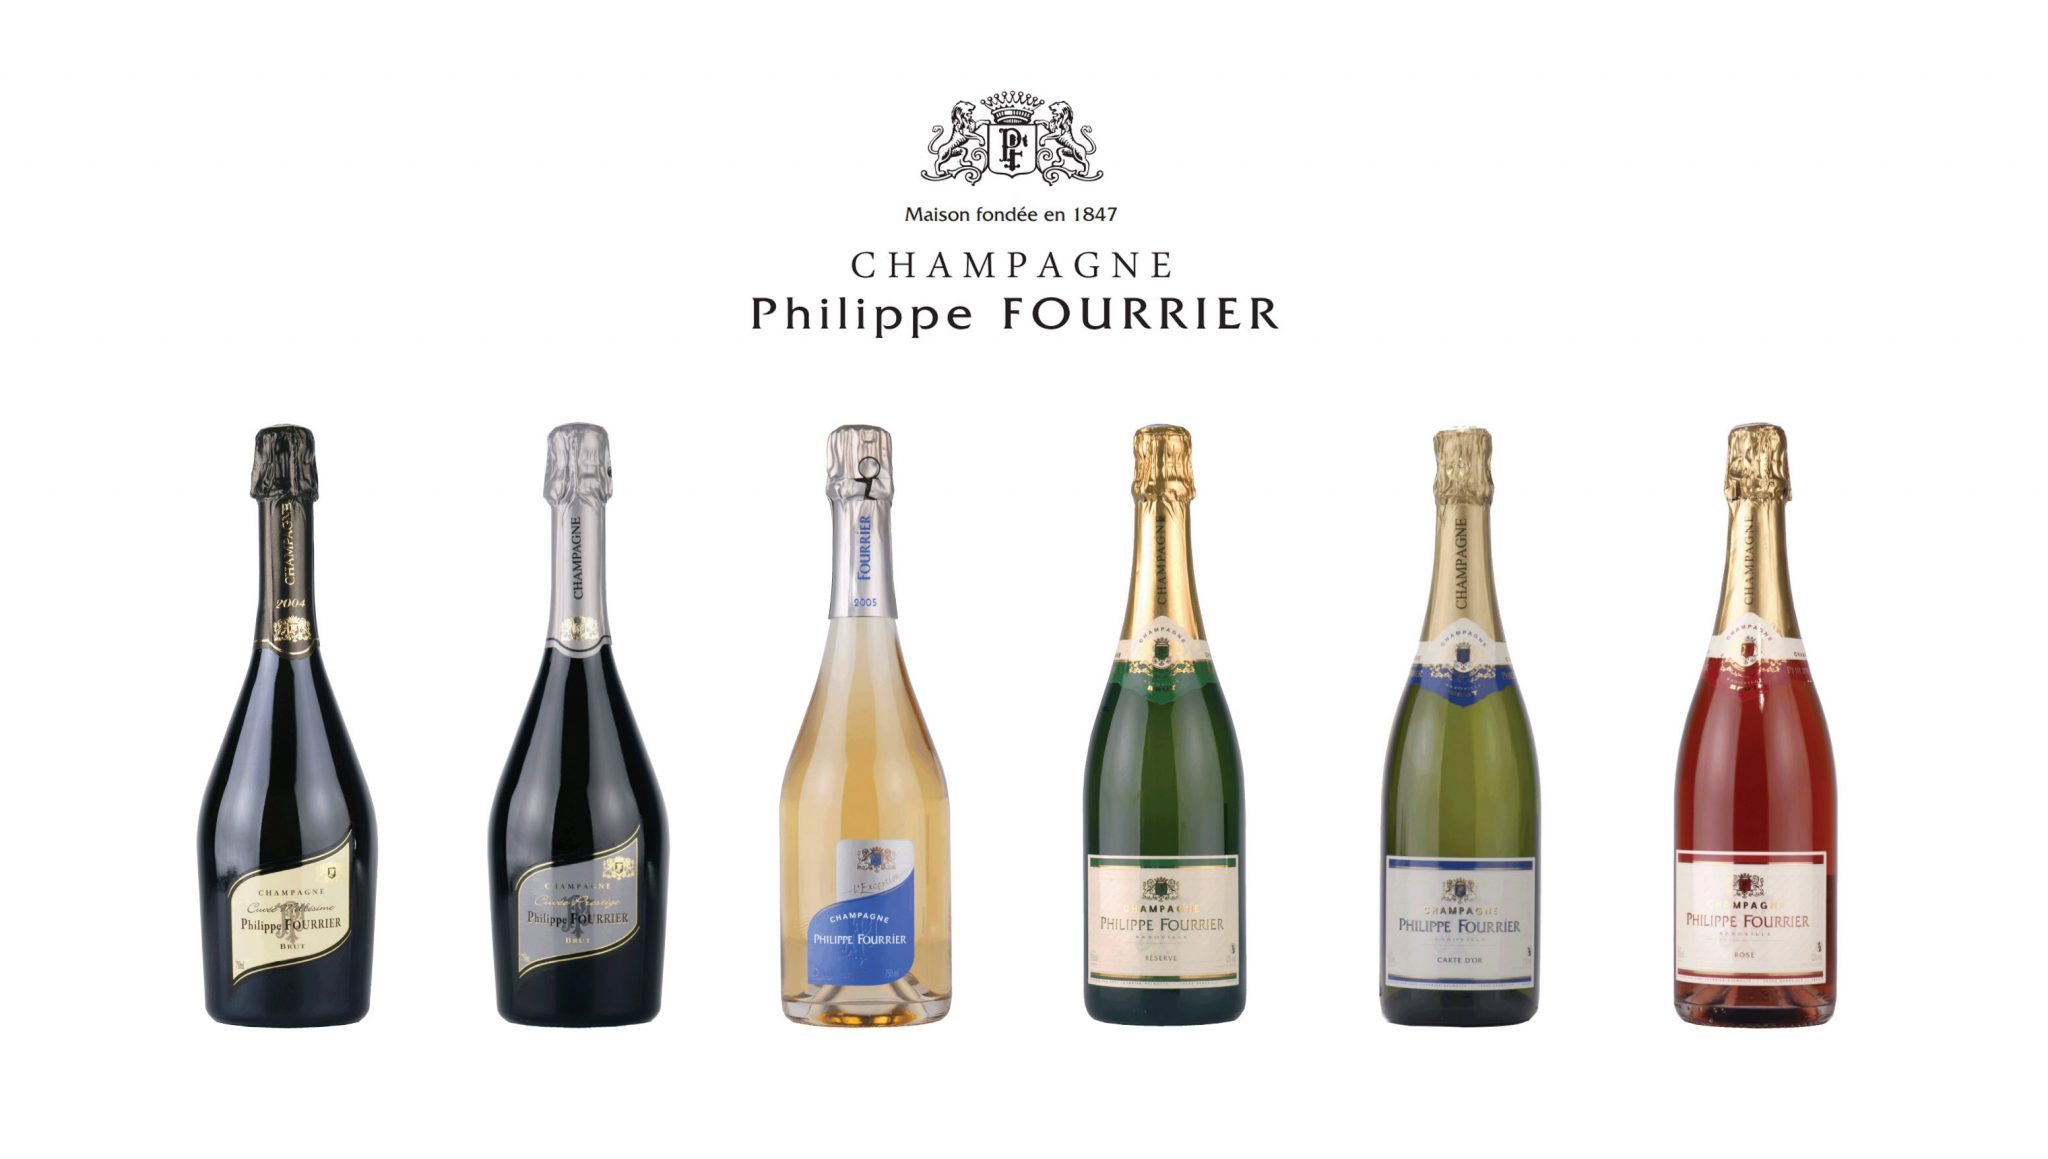 Champagner Philippe Fourrier